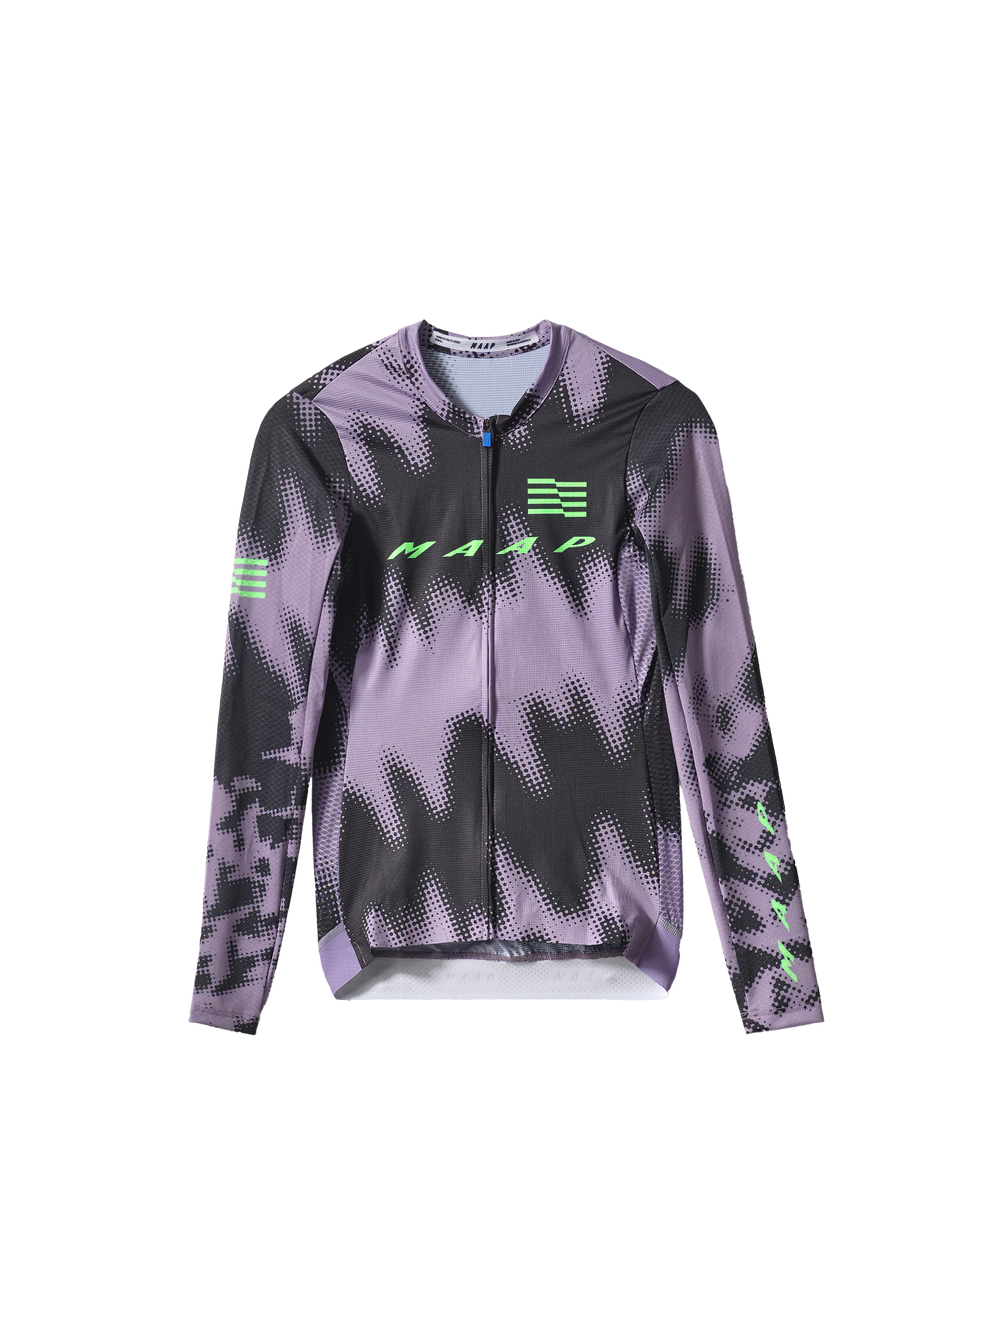 Product Image for Women's LPW Pro Air LS Jersey 2.0